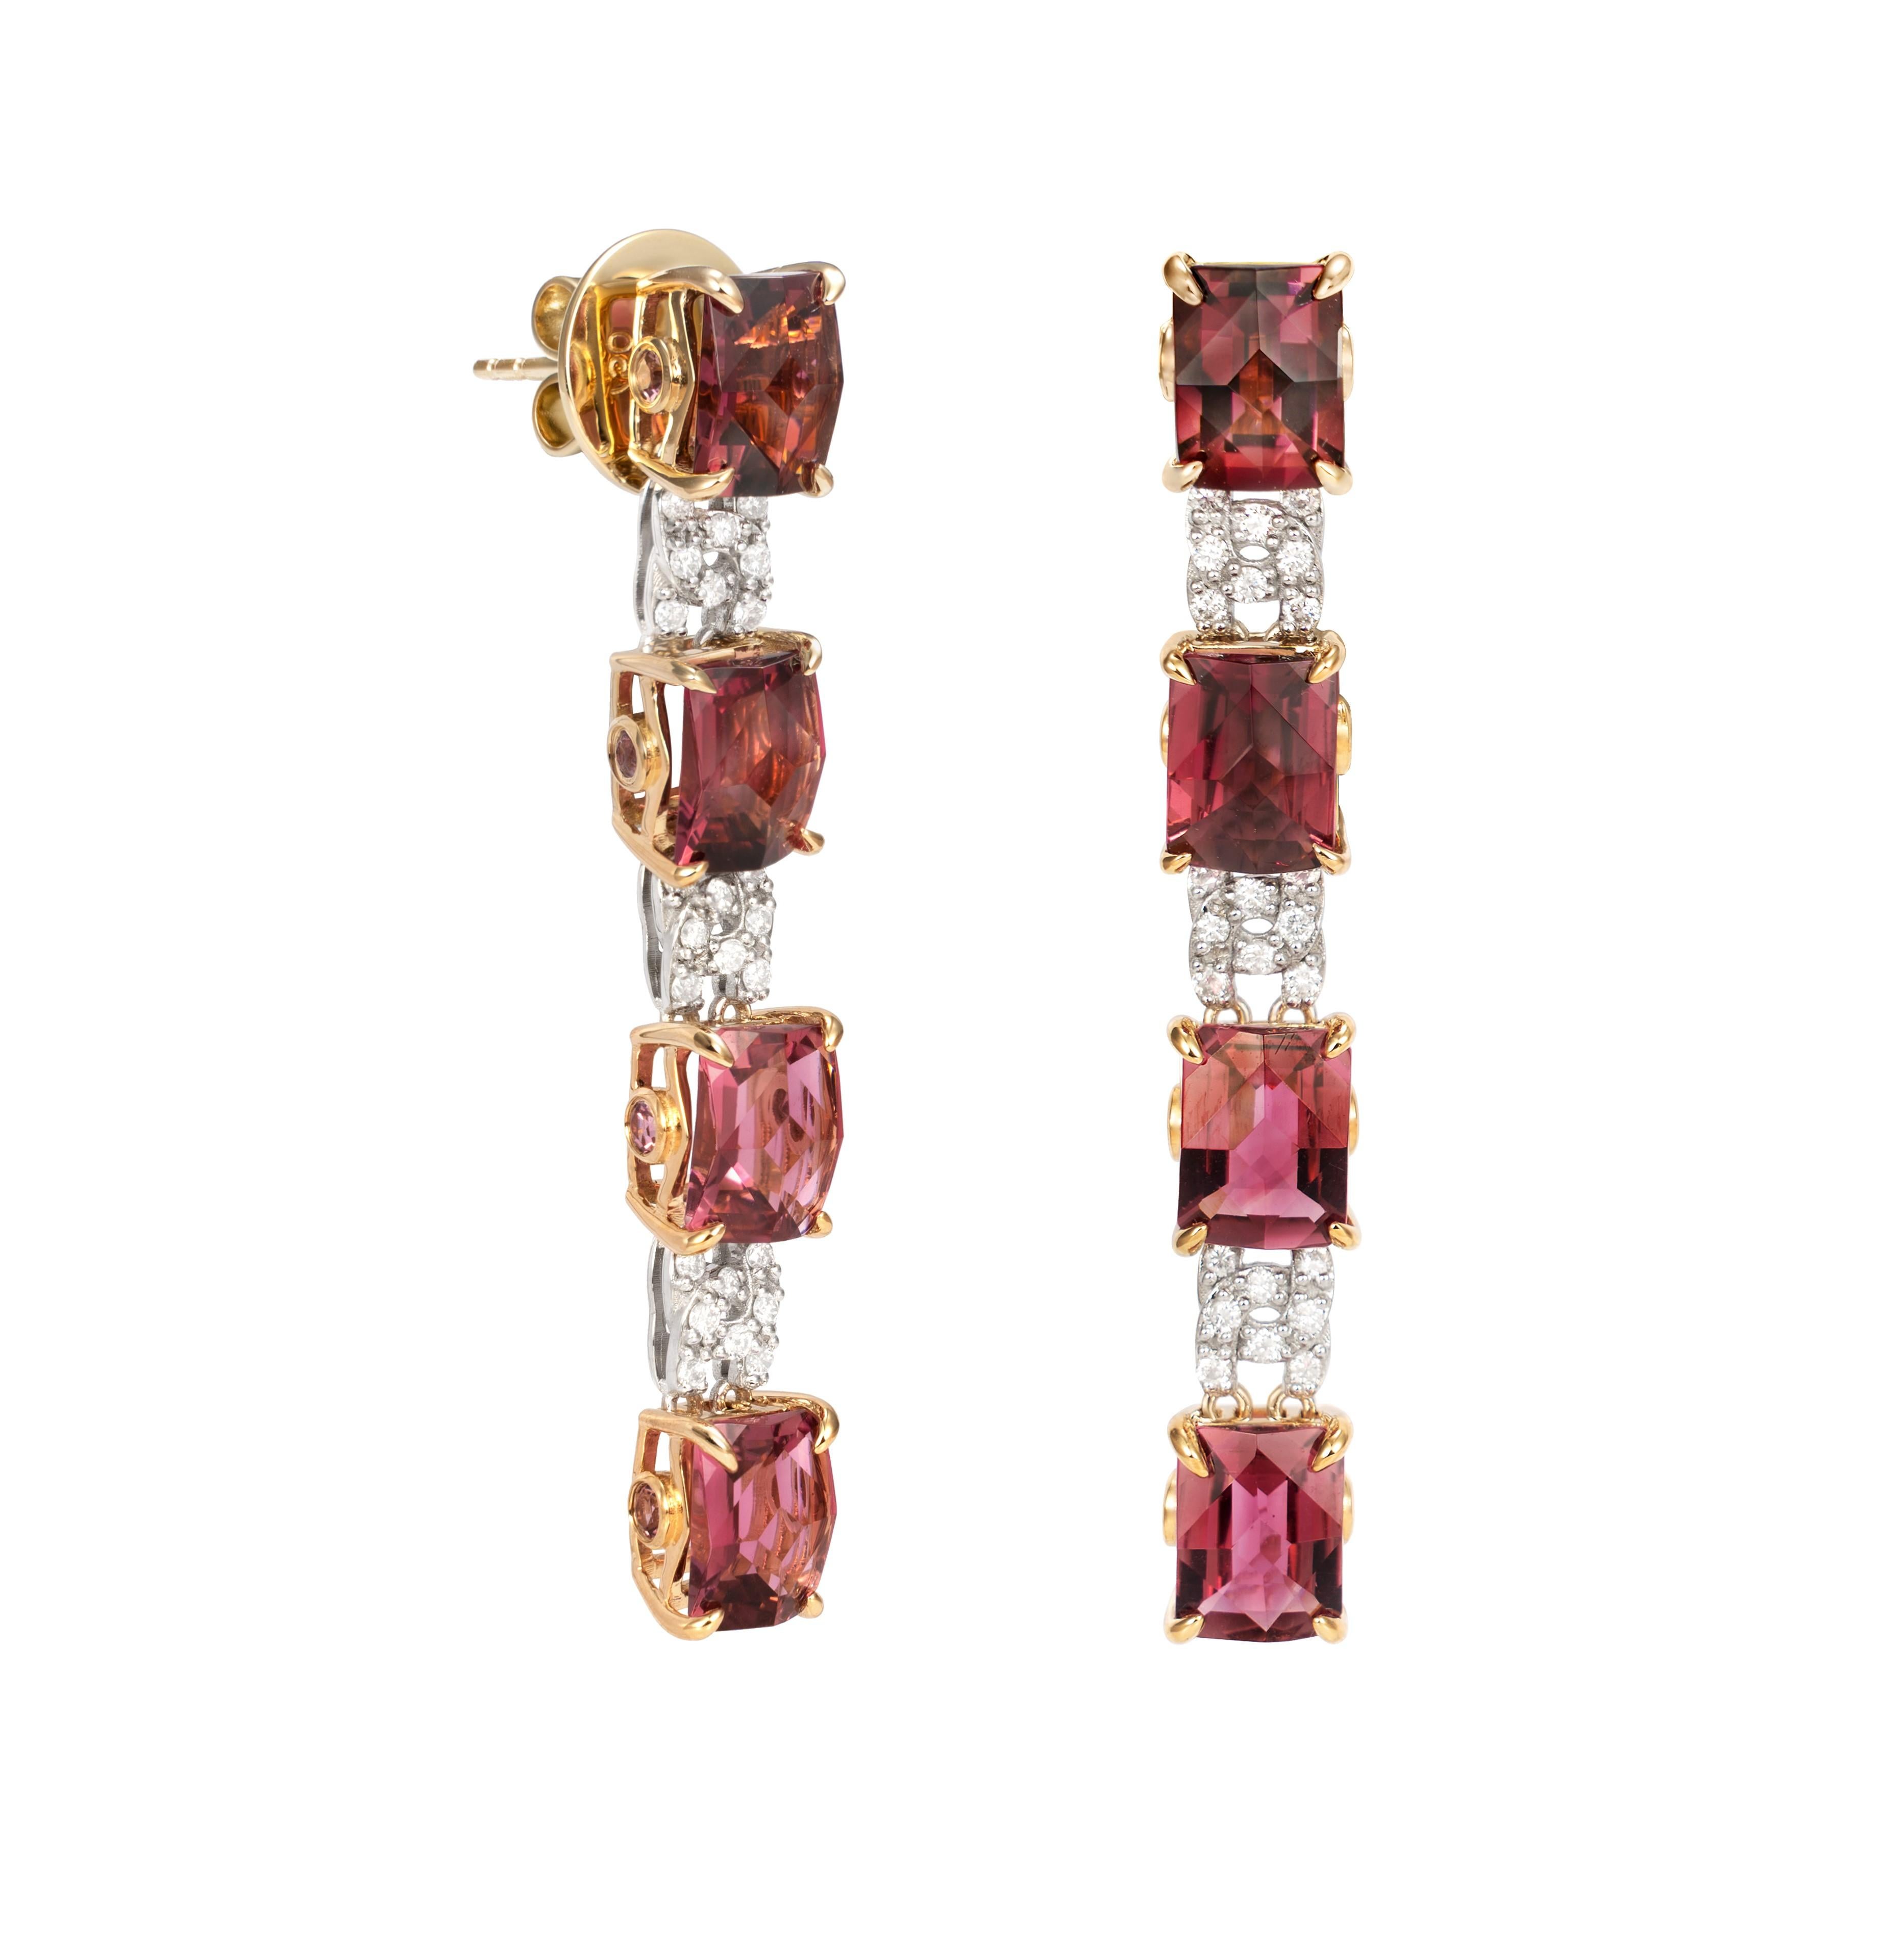 Contemporary Fancy Cut Ombre Pink Tourmaline Earrings with Diamond in 18 Karat Gold For Sale